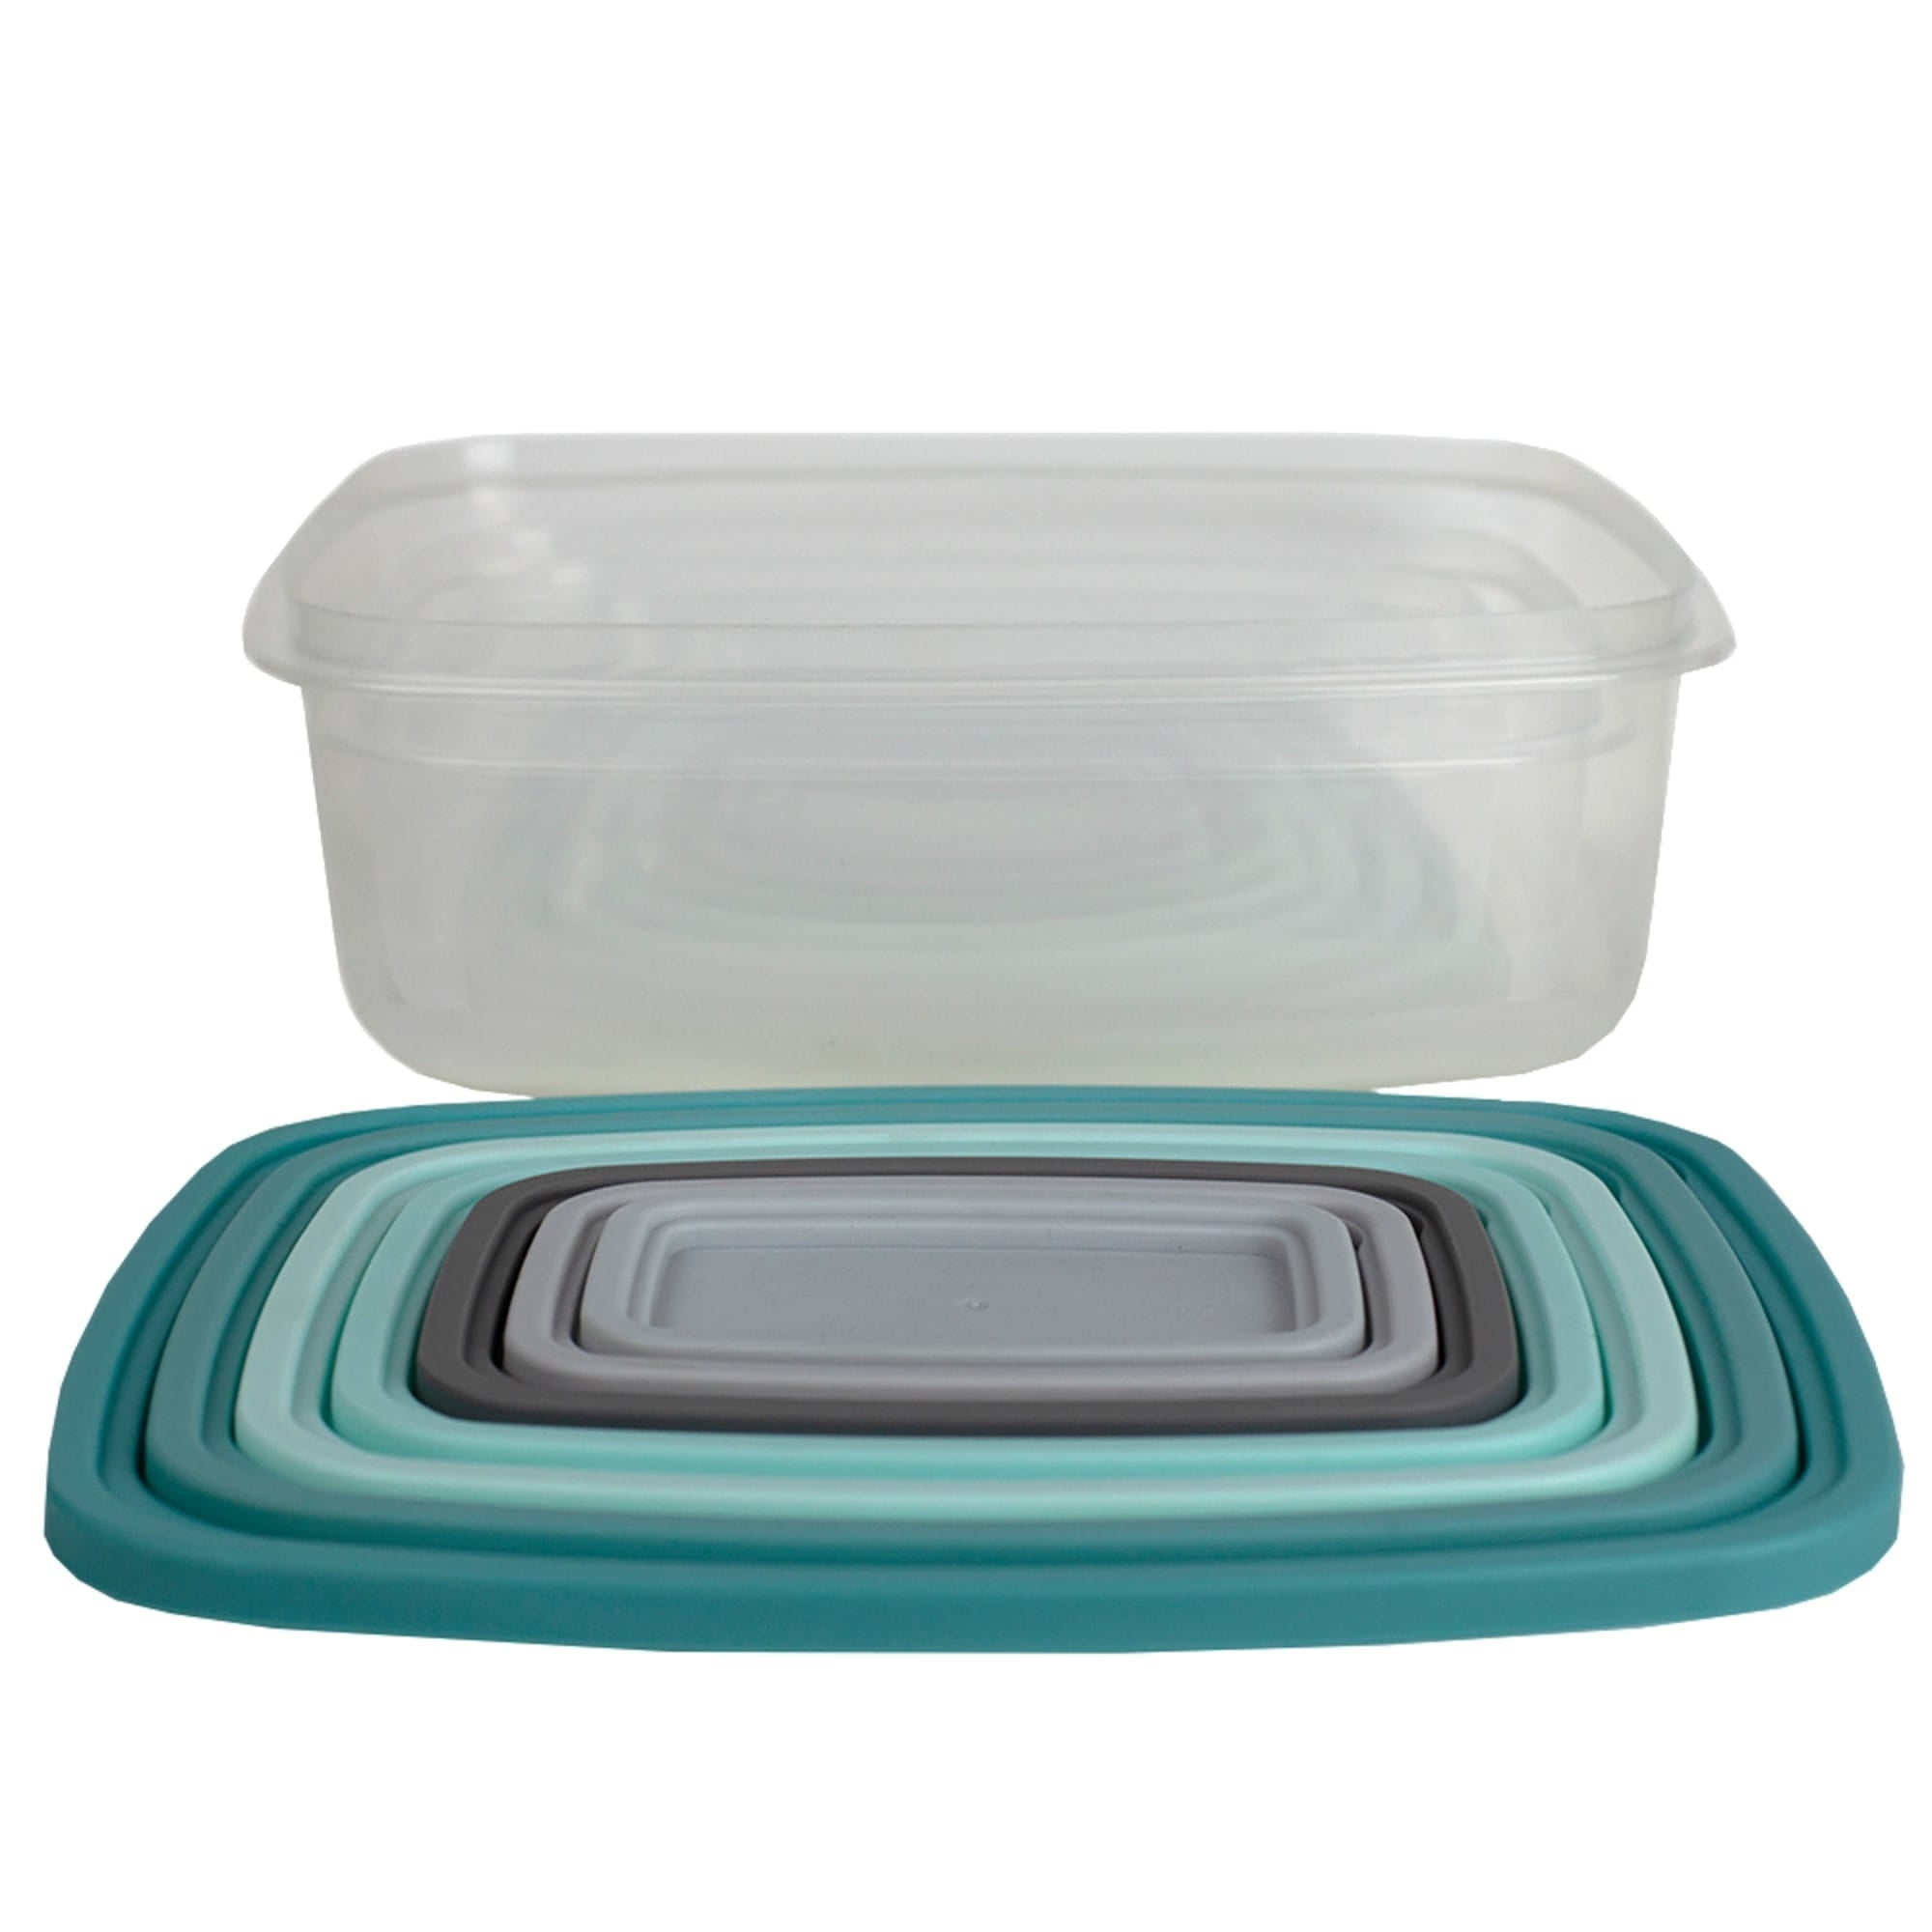 Home Basics 14 Piece Plastic Food Storage Container Set with Secure Fit Plastic Lids, Multi-Color $5.00 EACH, CASE PACK OF 12